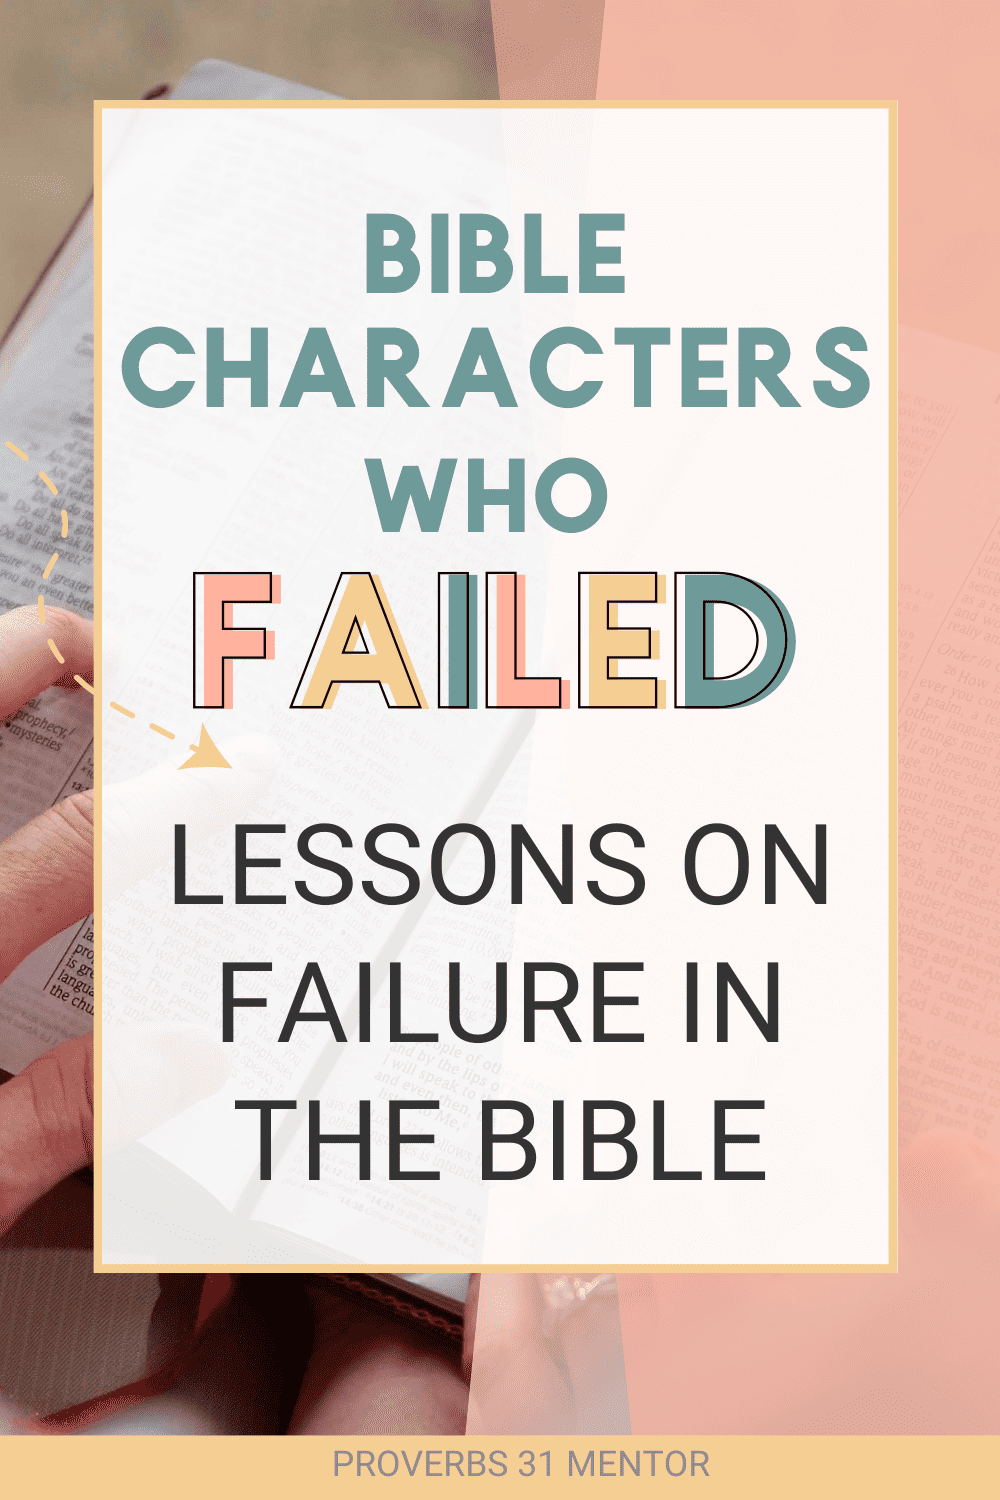 Bible Characters Who Failed: Lessons on Failure in the Bible